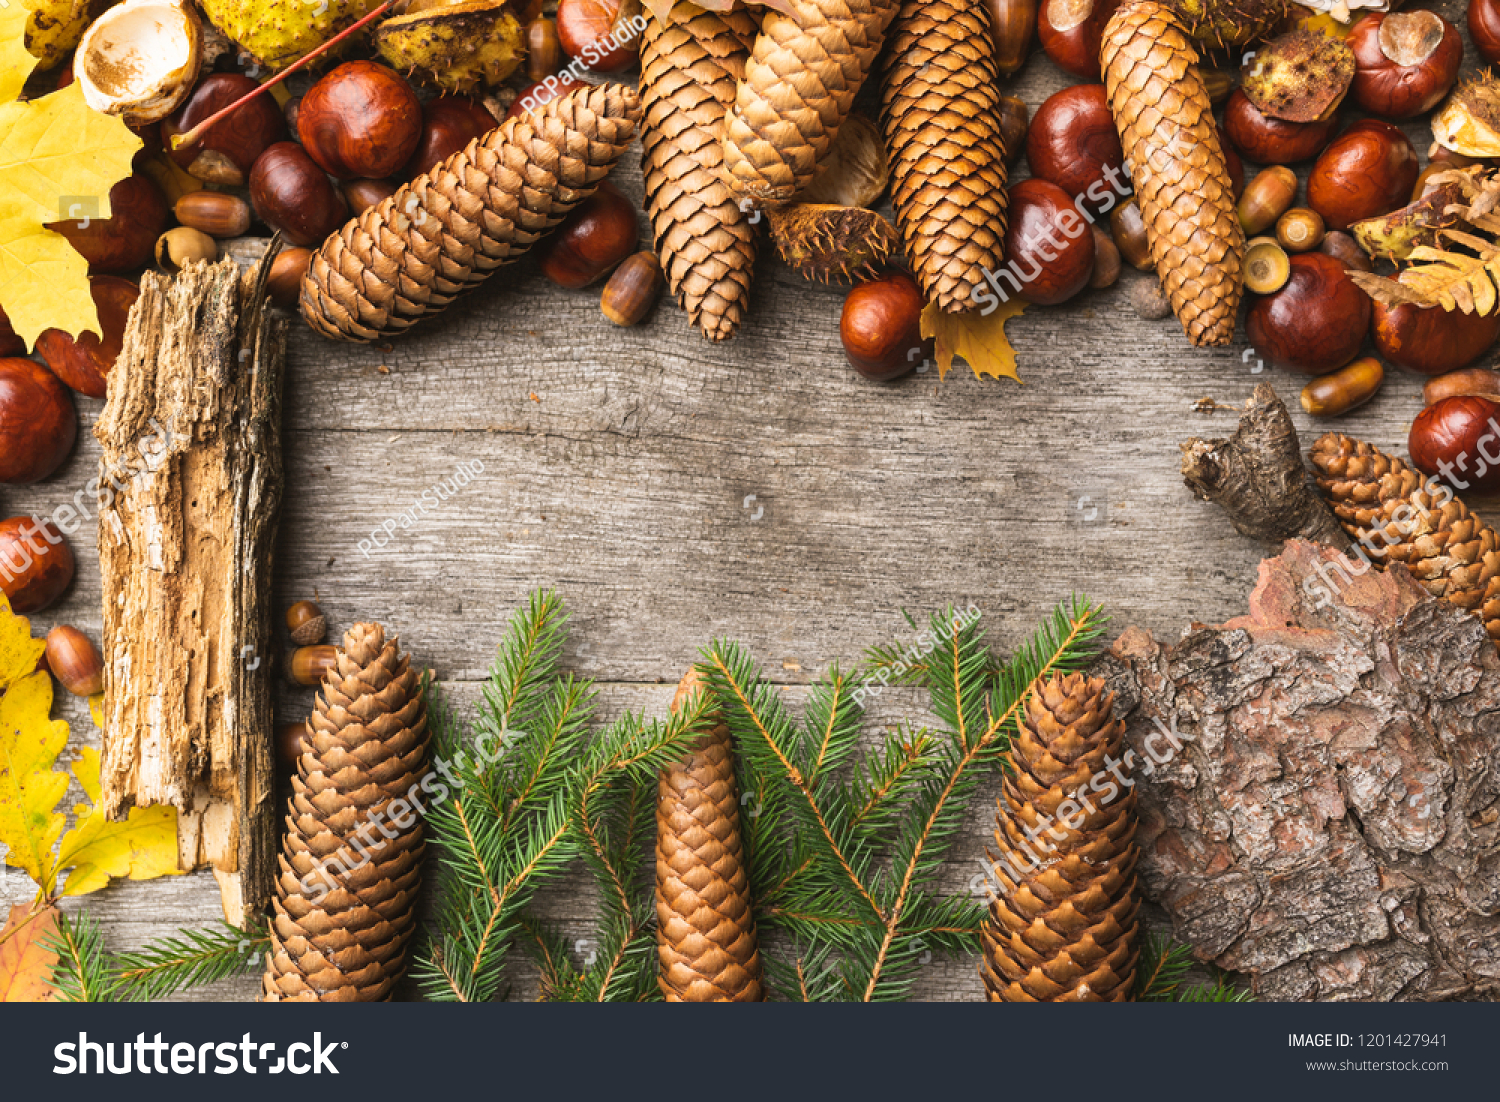 Autumn arrangement, concept still life with chestnuts, cones, acorns, leaves, bark, fir, pine tree on wooden background. Seasonal frame from autumn harvest. Flat-lay visualization with copy space #1201427941